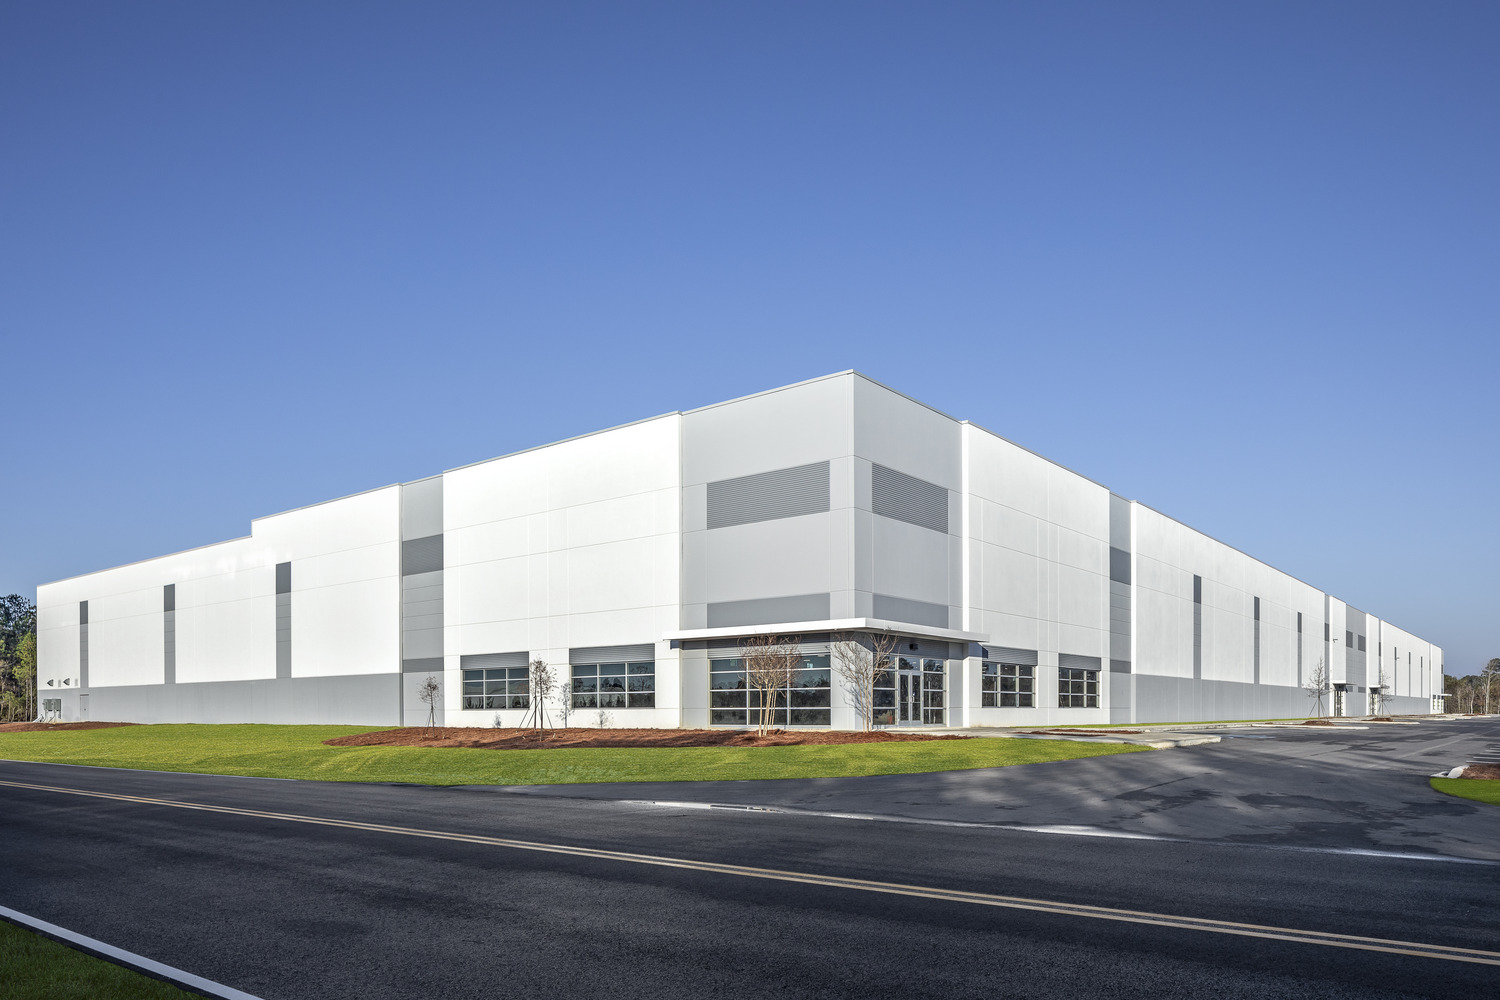 The second phase of an industrial center in Summerville is under construction. The 204,000-square-foot facility is part of the Portside Distribution Center. (Photo/Provided)